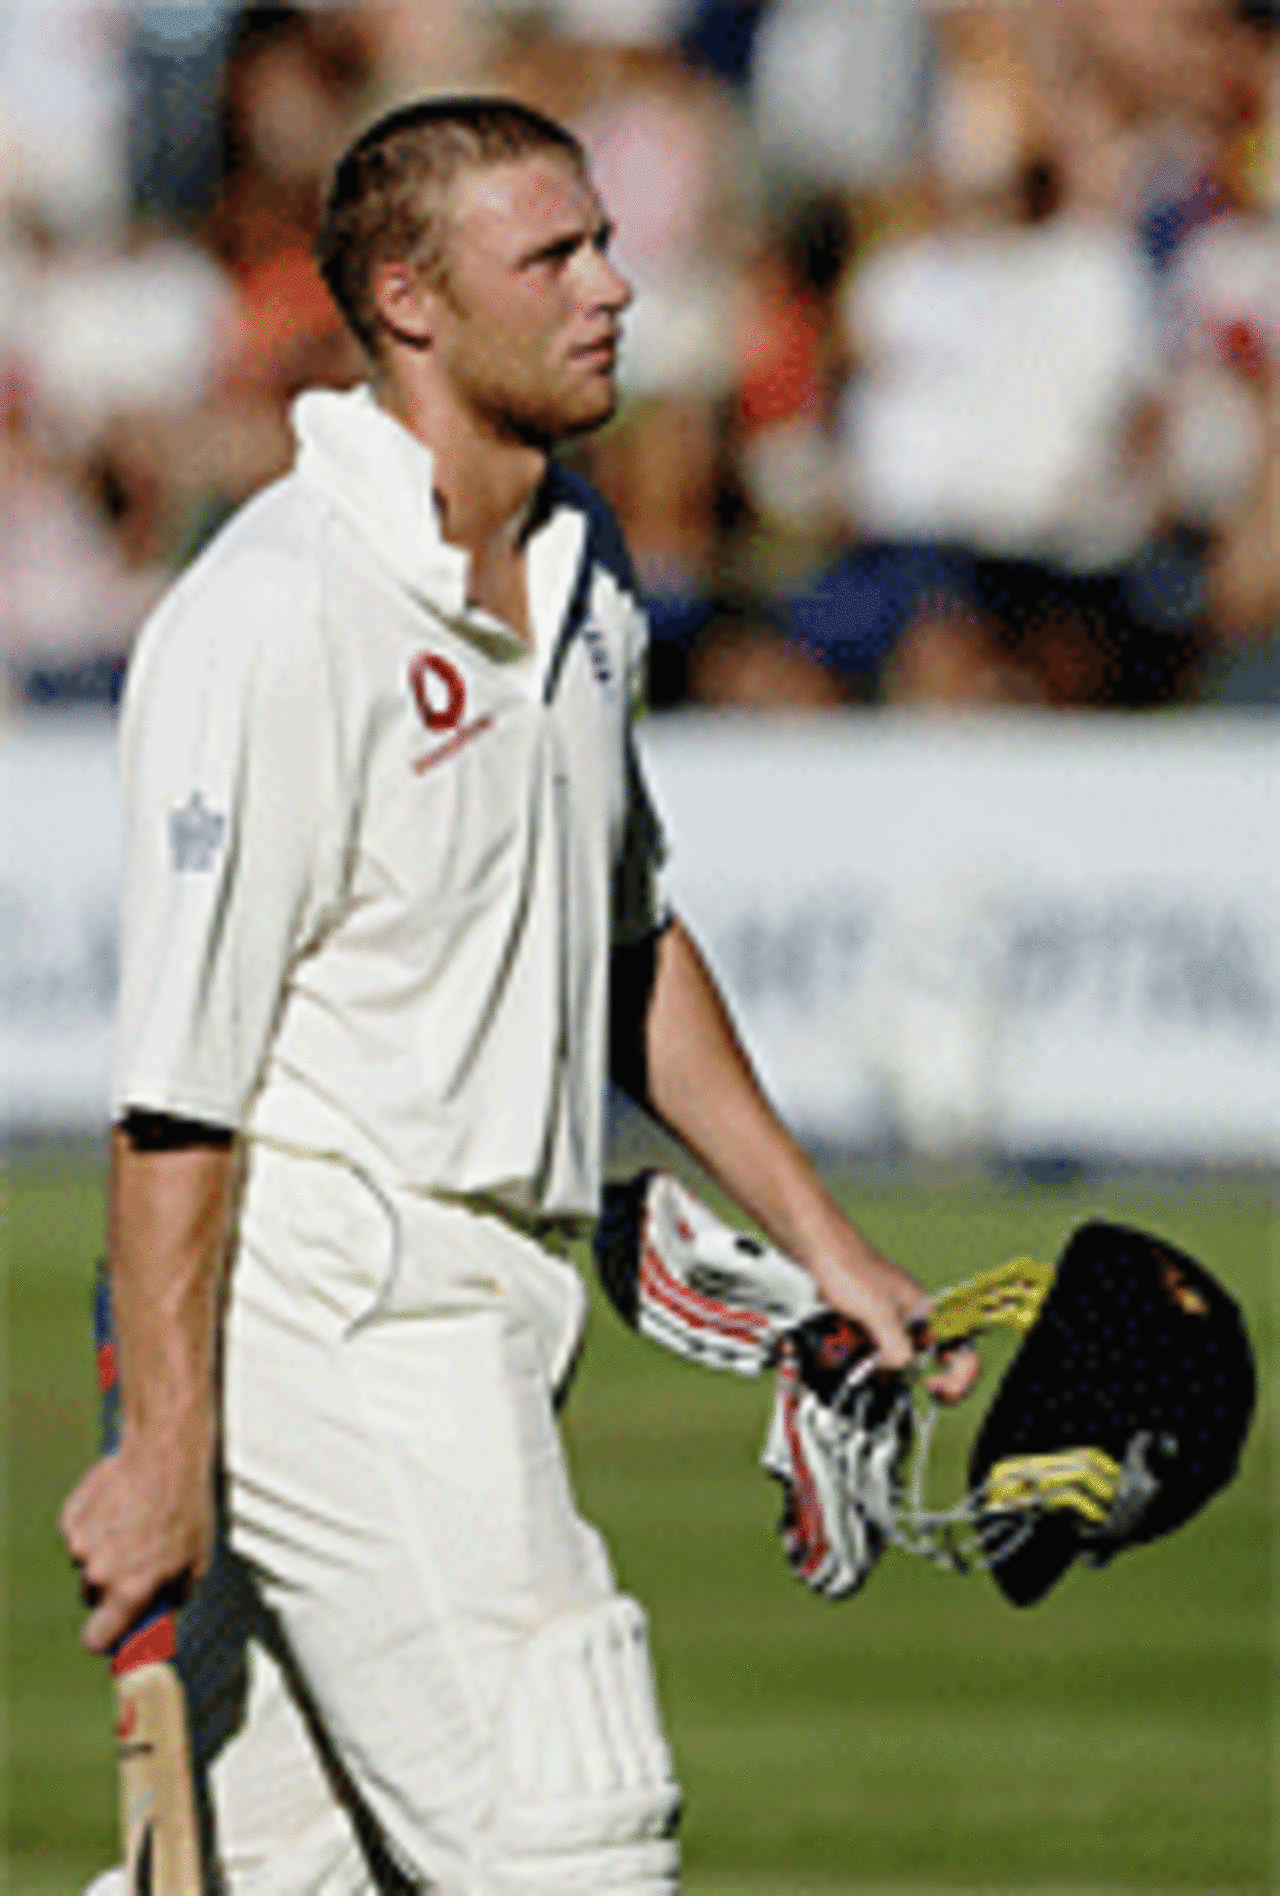 Andrew Flintoff walks off after being dismissed by Shaun Pollock on the fourth day of the 3rd Test at Cape Town, South Africa v England, January 5, 2005